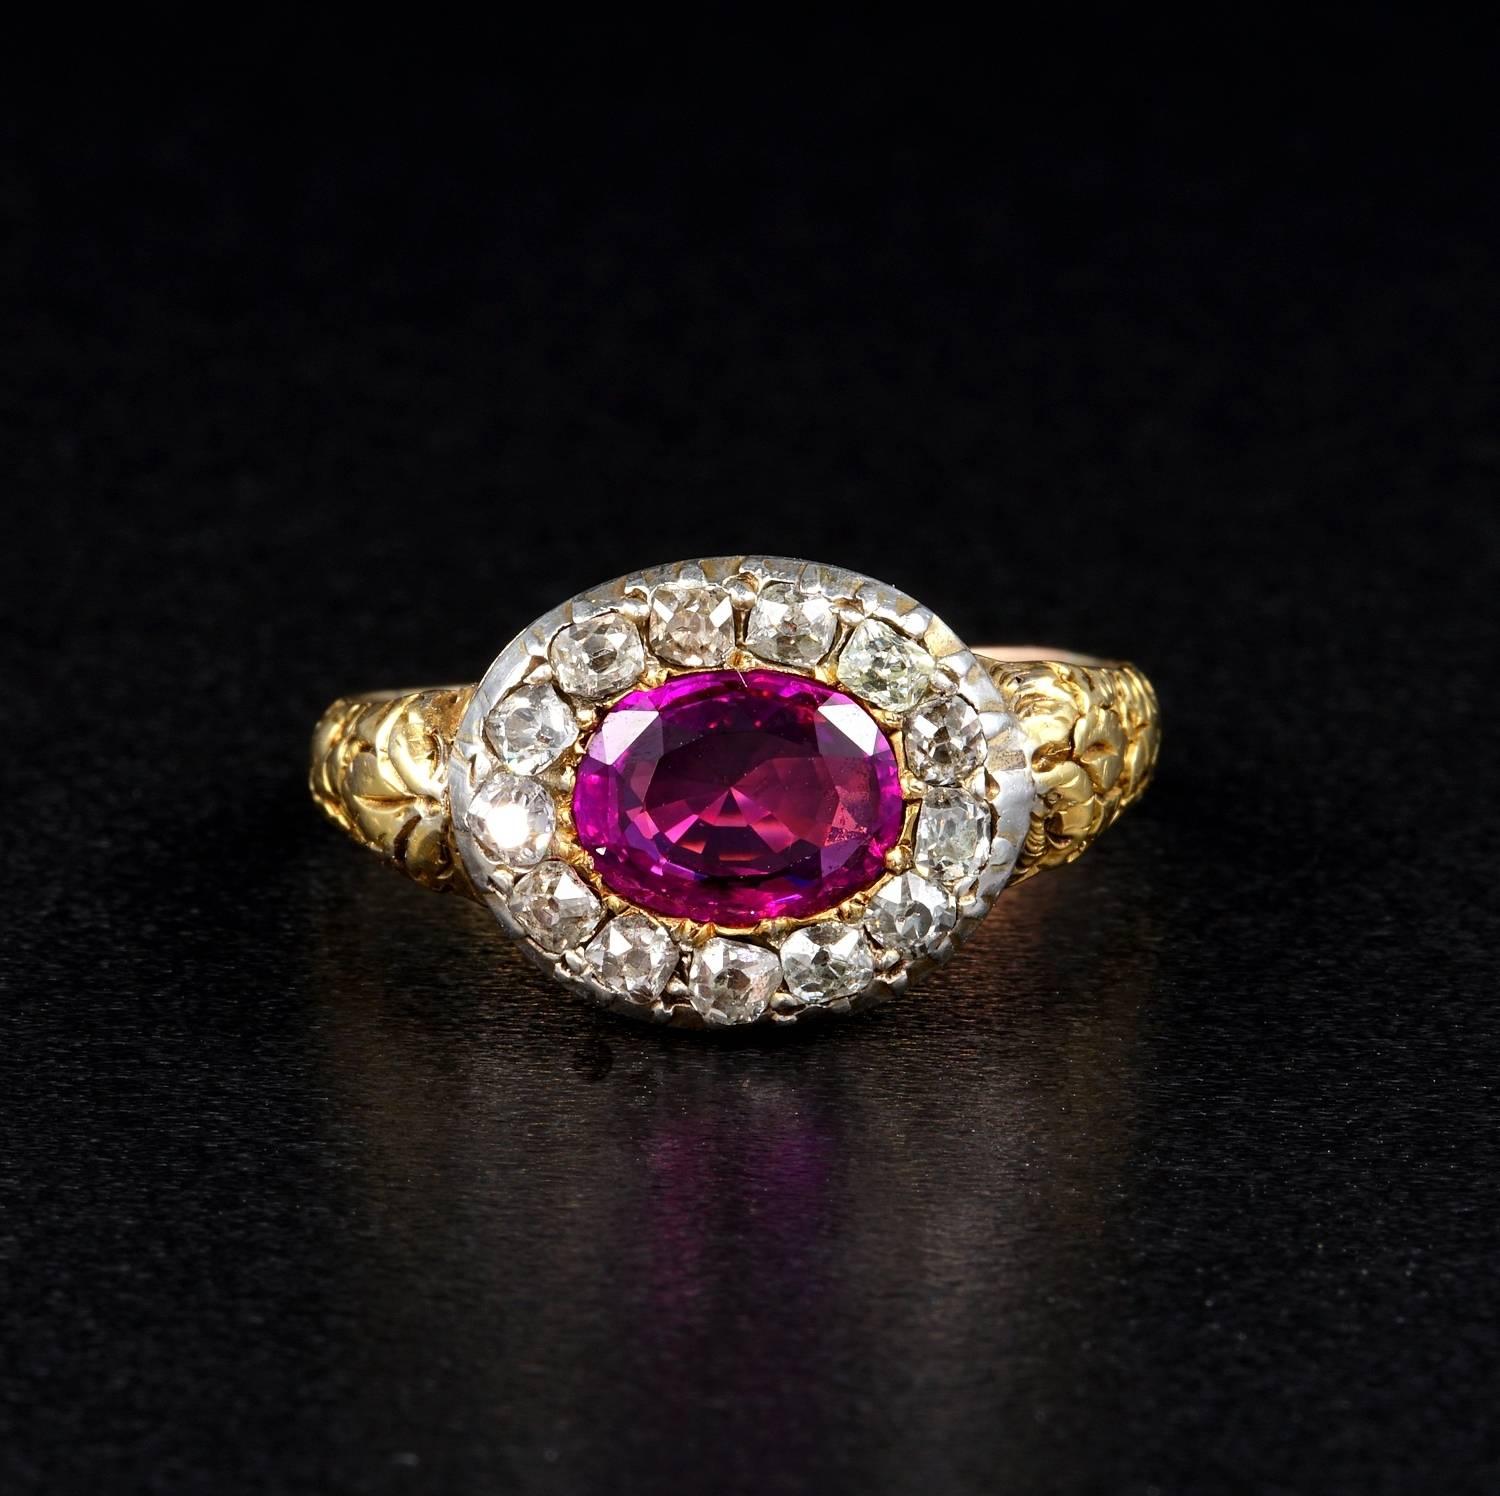 This spectacular Georgian ring stands out for age, design and quality rare gemstones.

An early 1800 (19KT and silver tested) beautifully crafted to exalt the beauty of the rare Natural Ruby set on it - not treated or heated in any way boasting